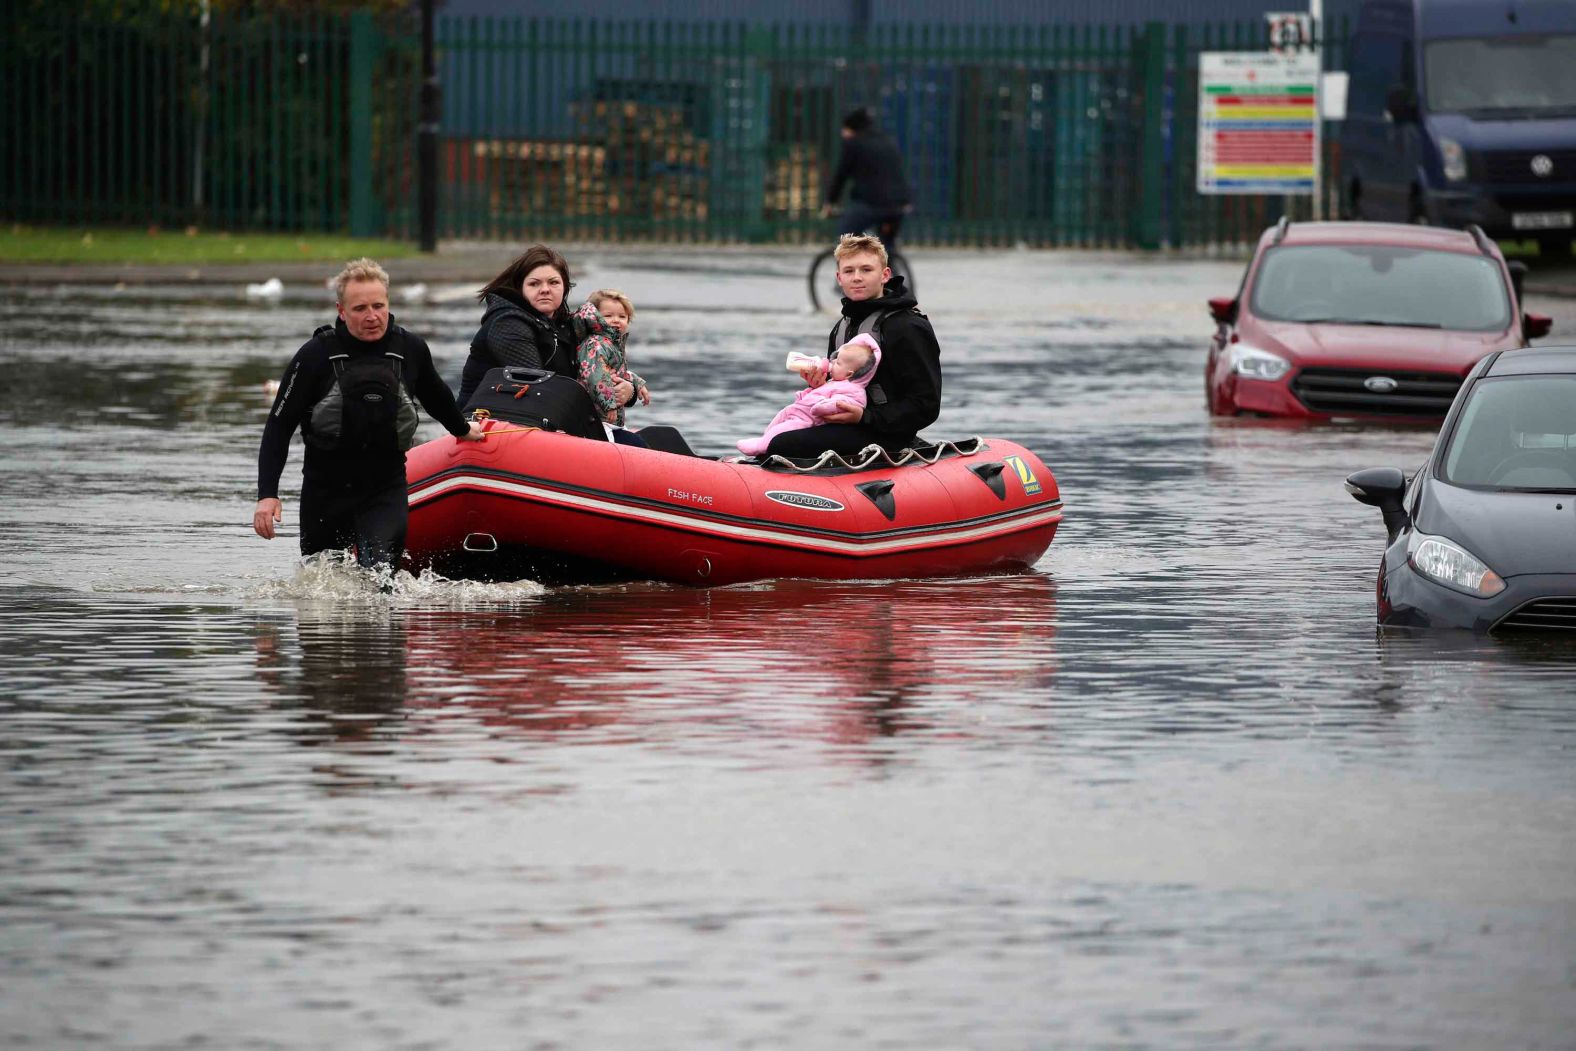 A family is pulled through the floodwater in an inflatable boat in Doncaster on Friday.